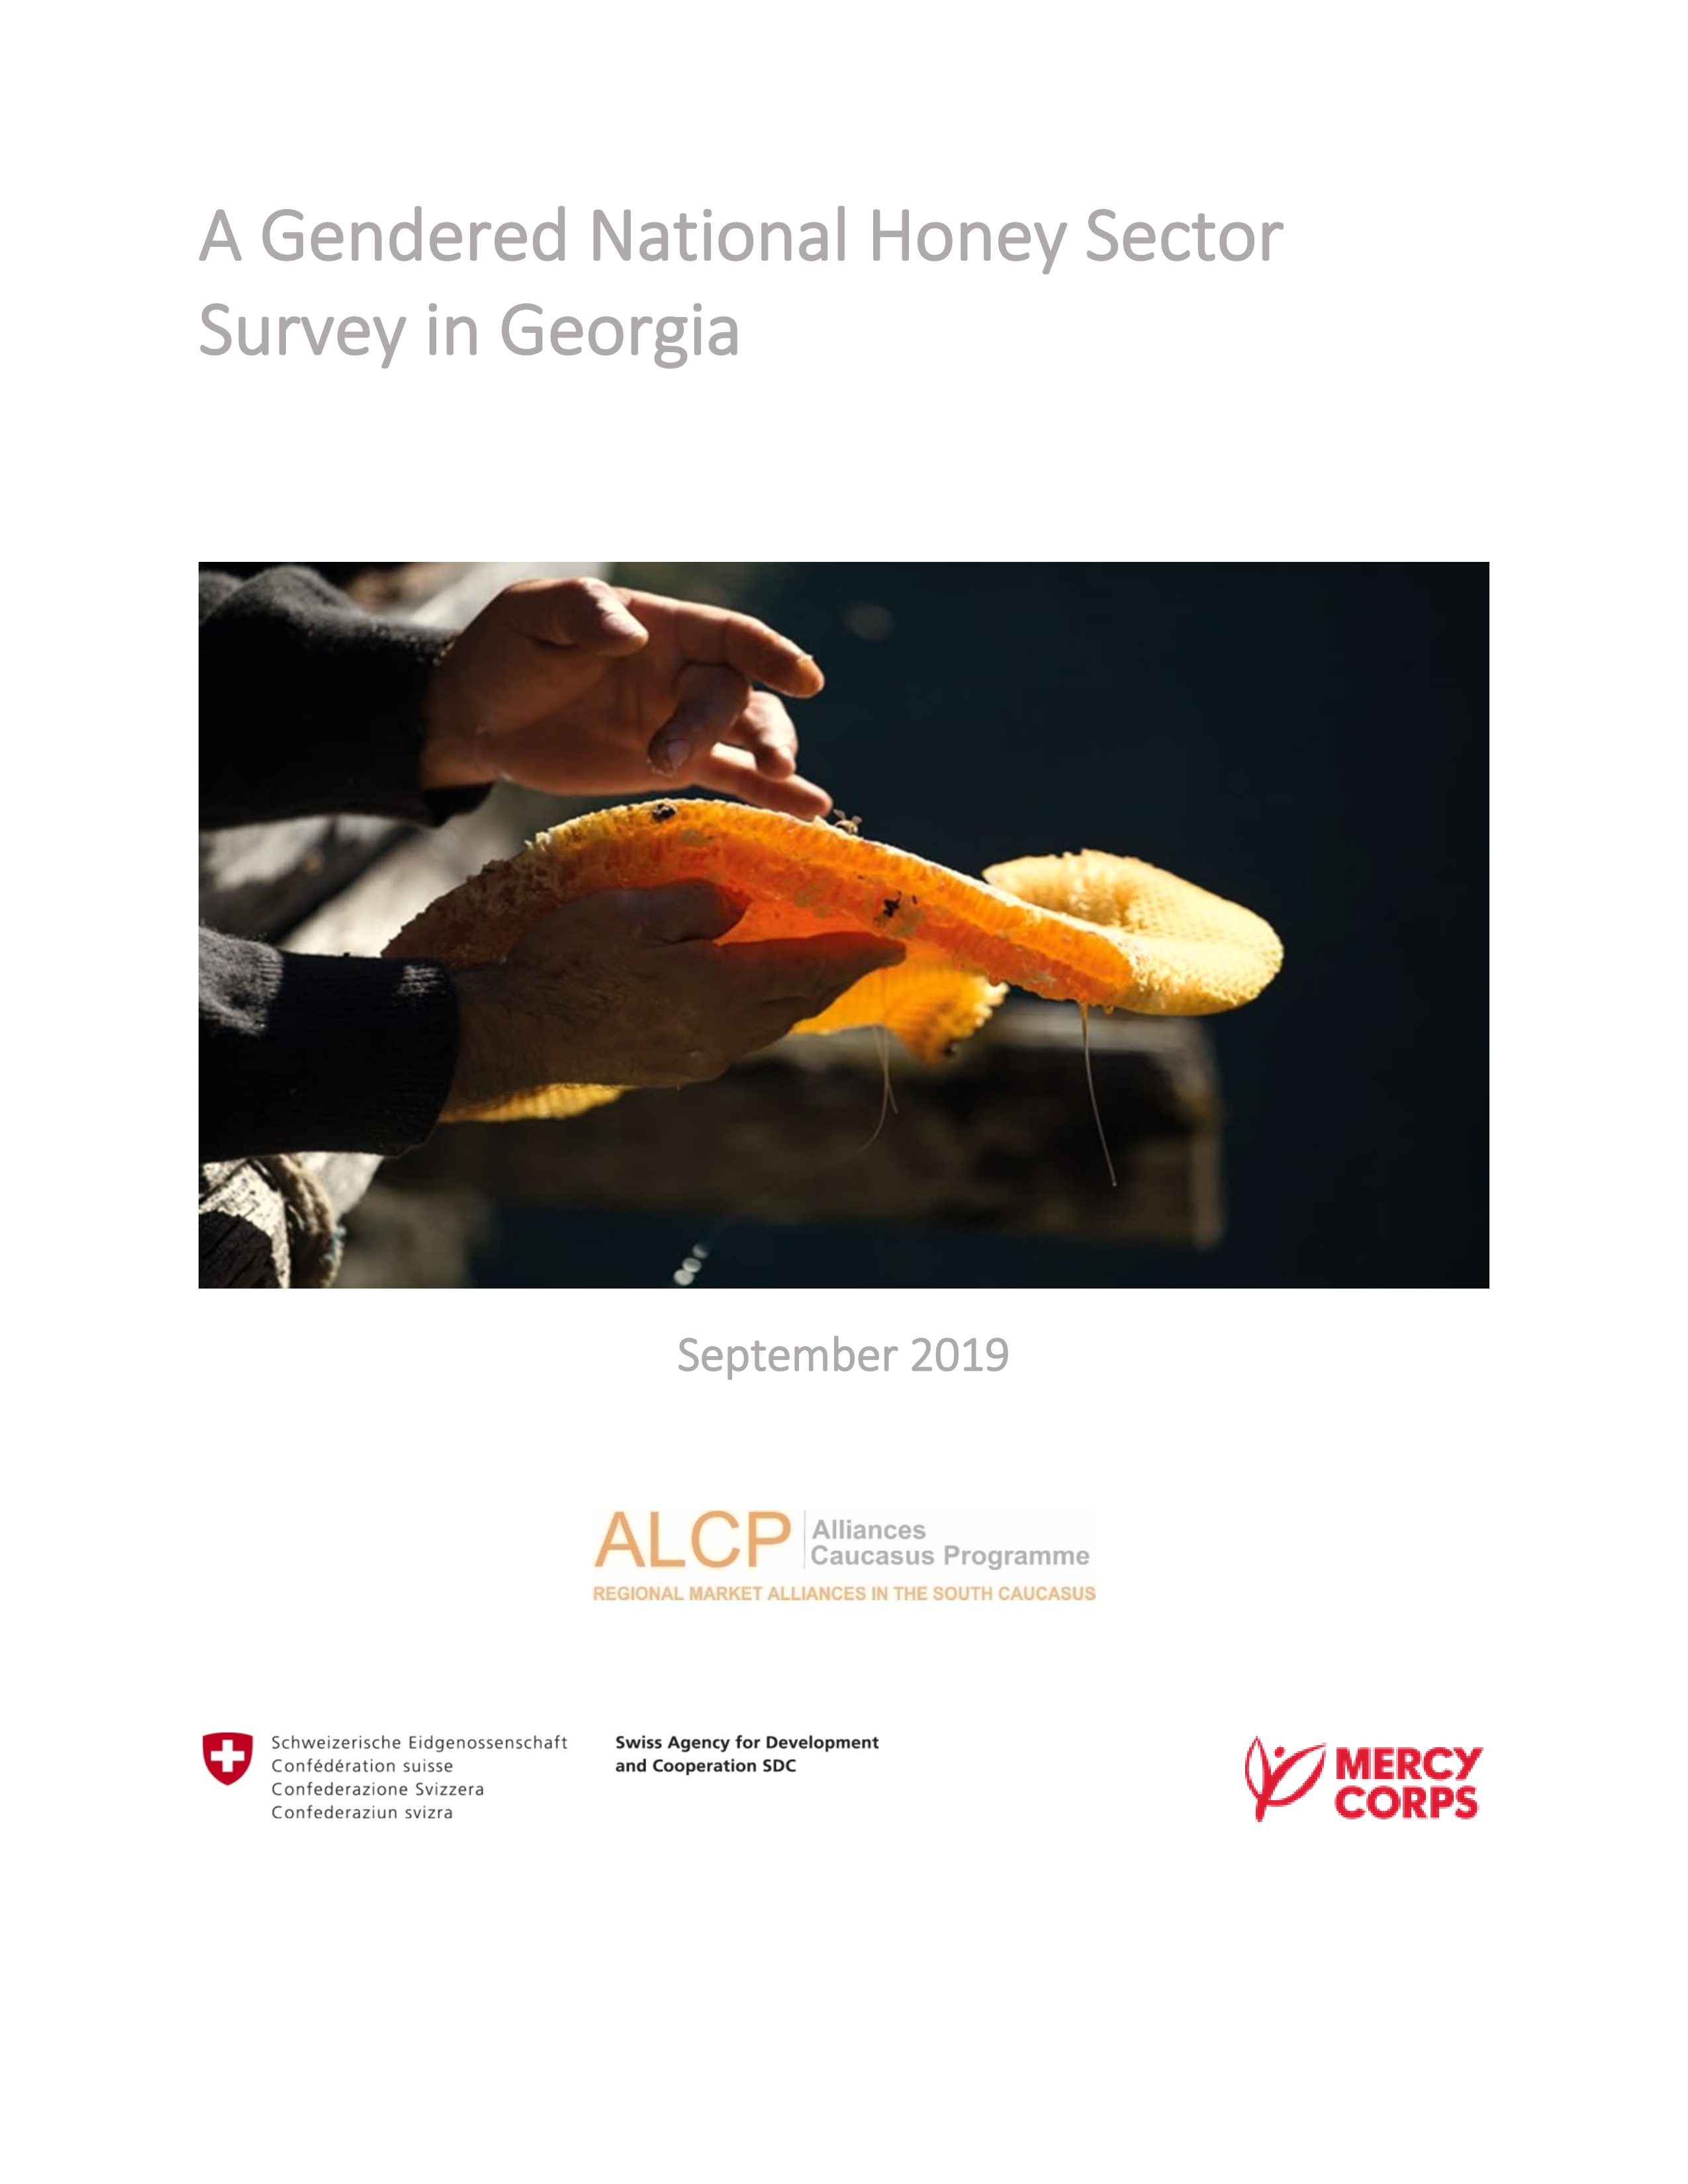 A Gendered National Honey Sector Survey in Georgia